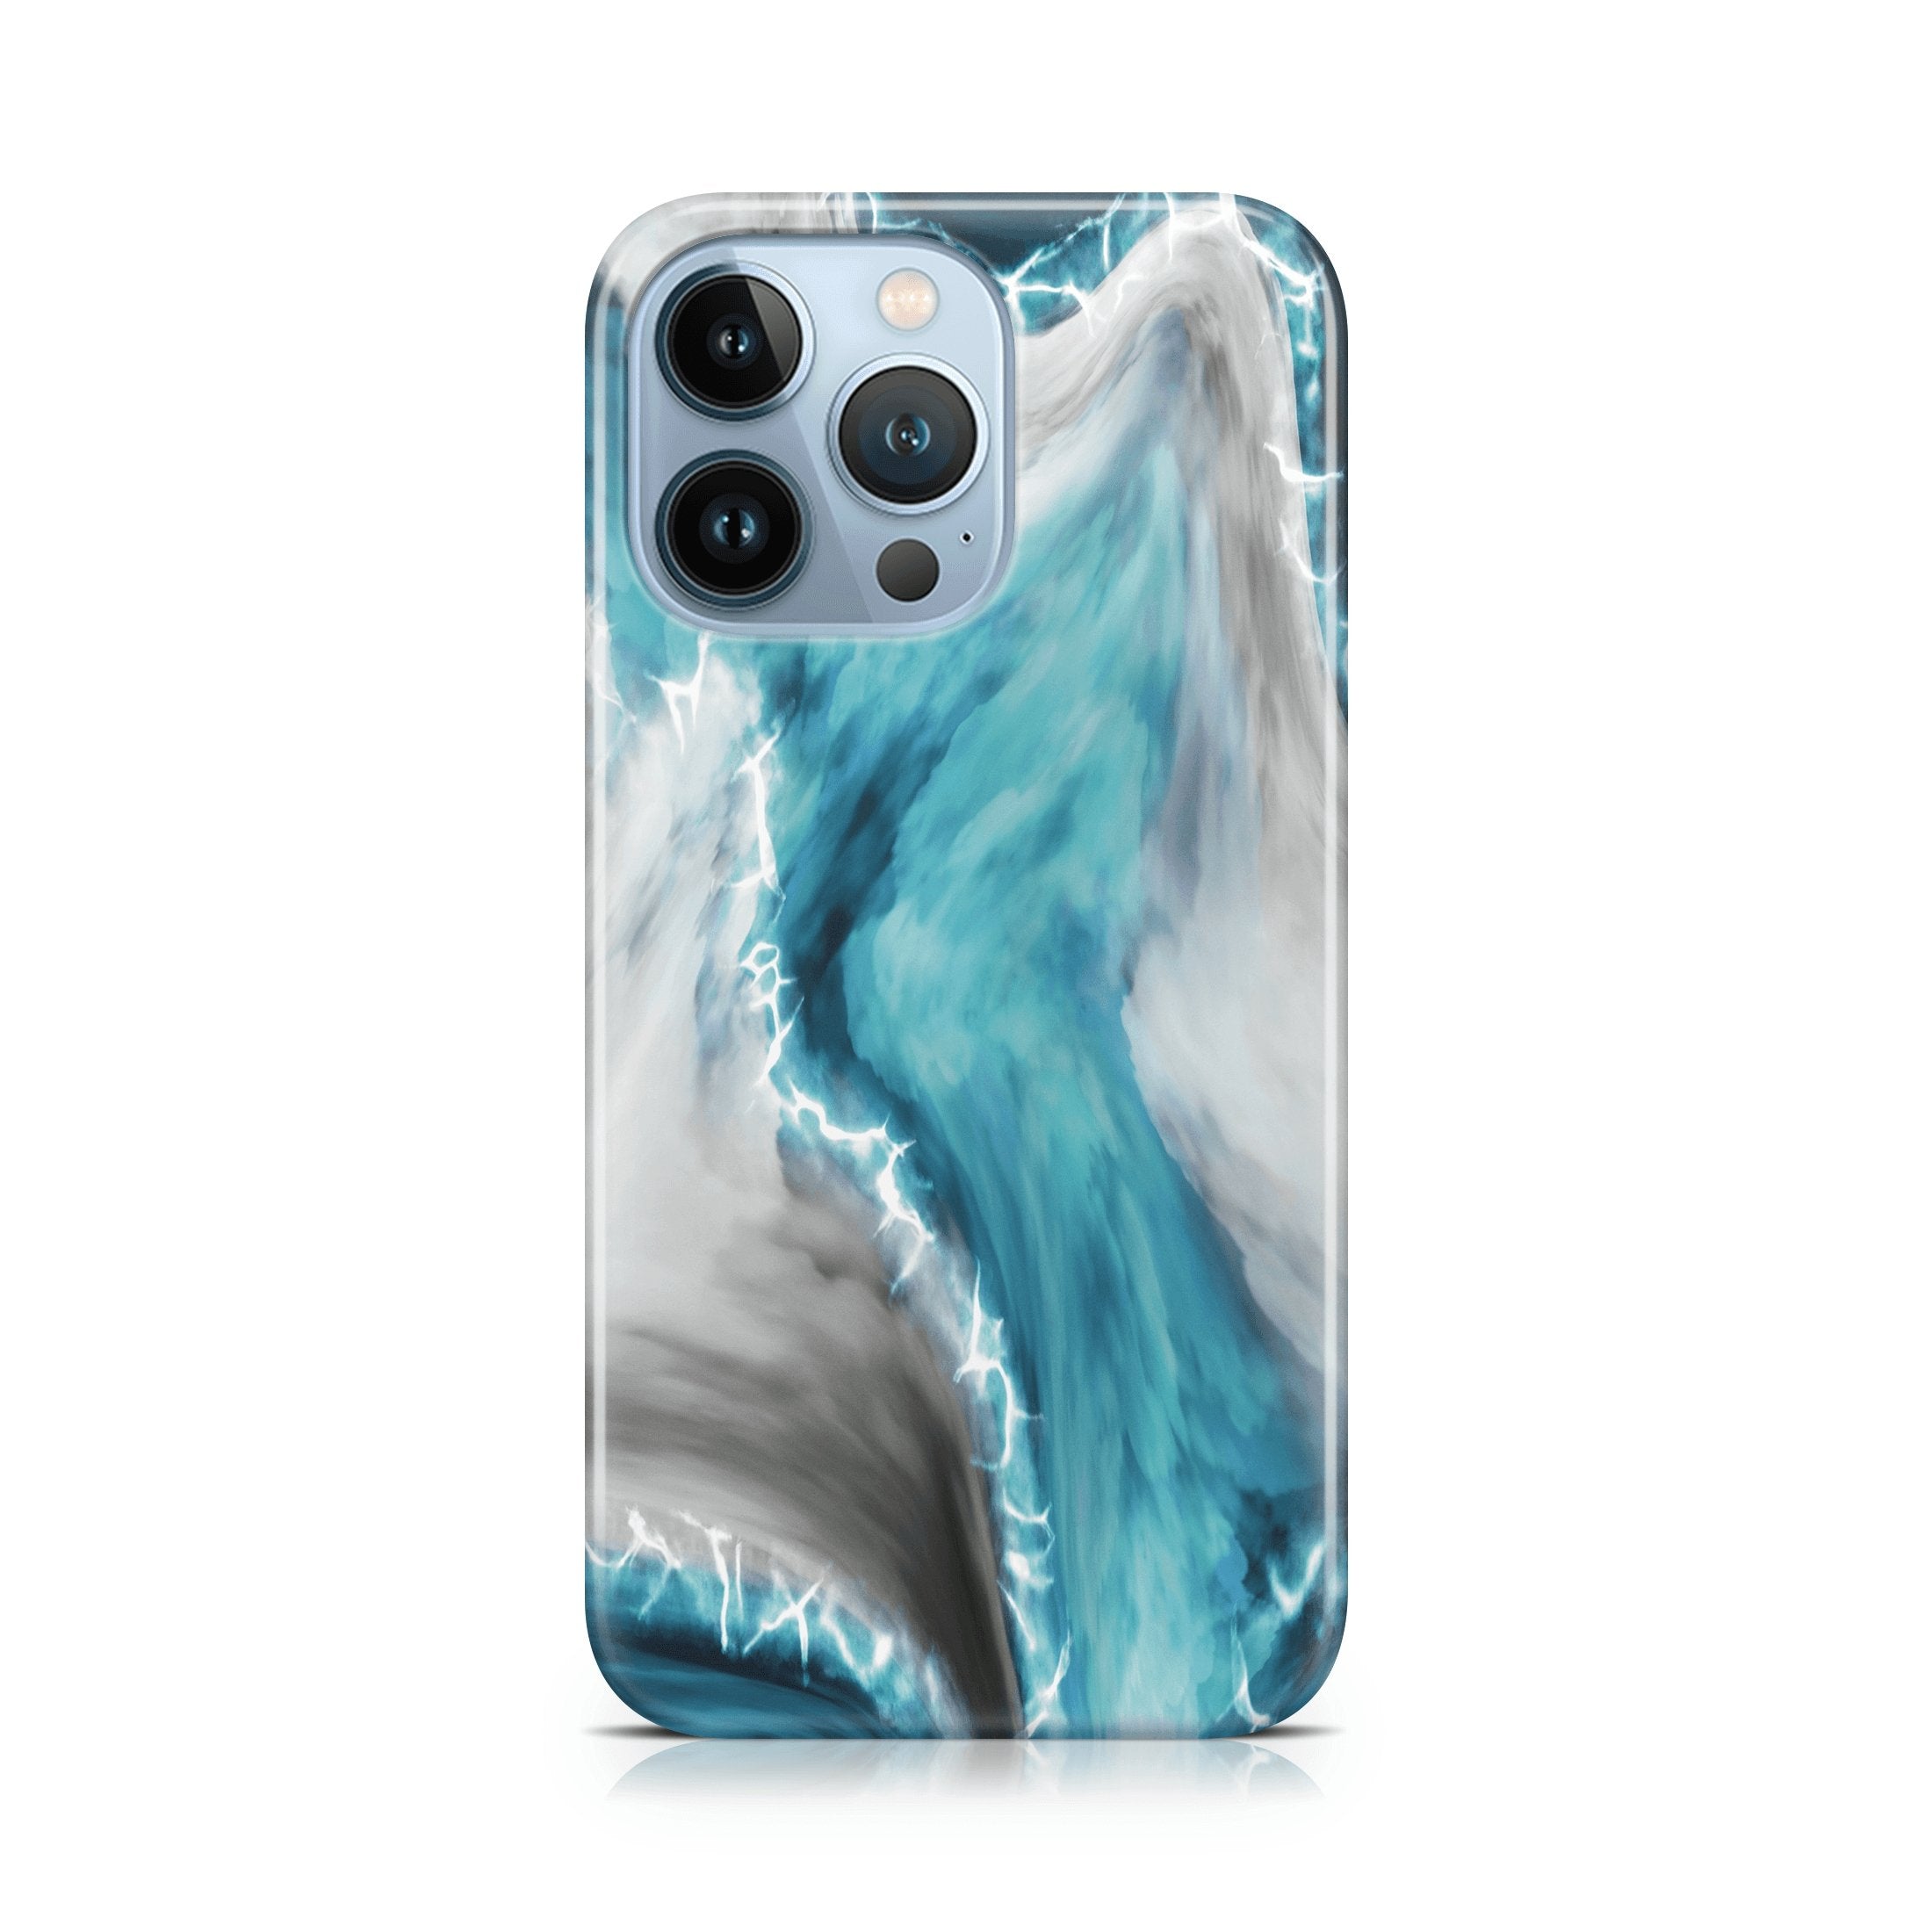 Cracked Ice - iPhone phone case designs by CaseSwagger